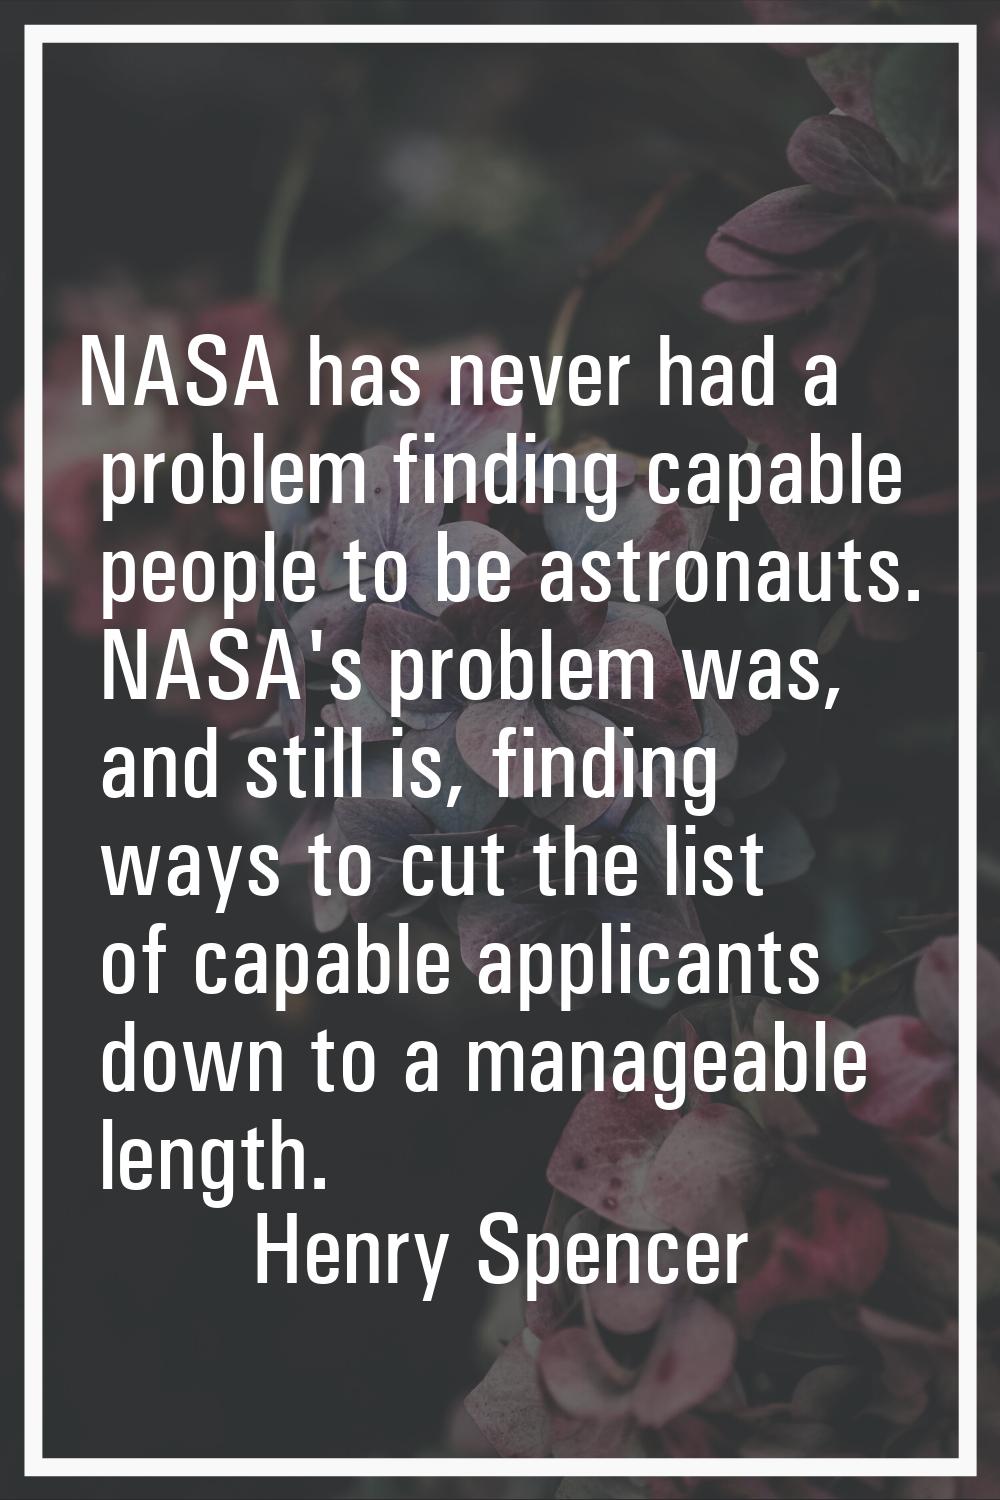 NASA has never had a problem finding capable people to be astronauts. NASA's problem was, and still